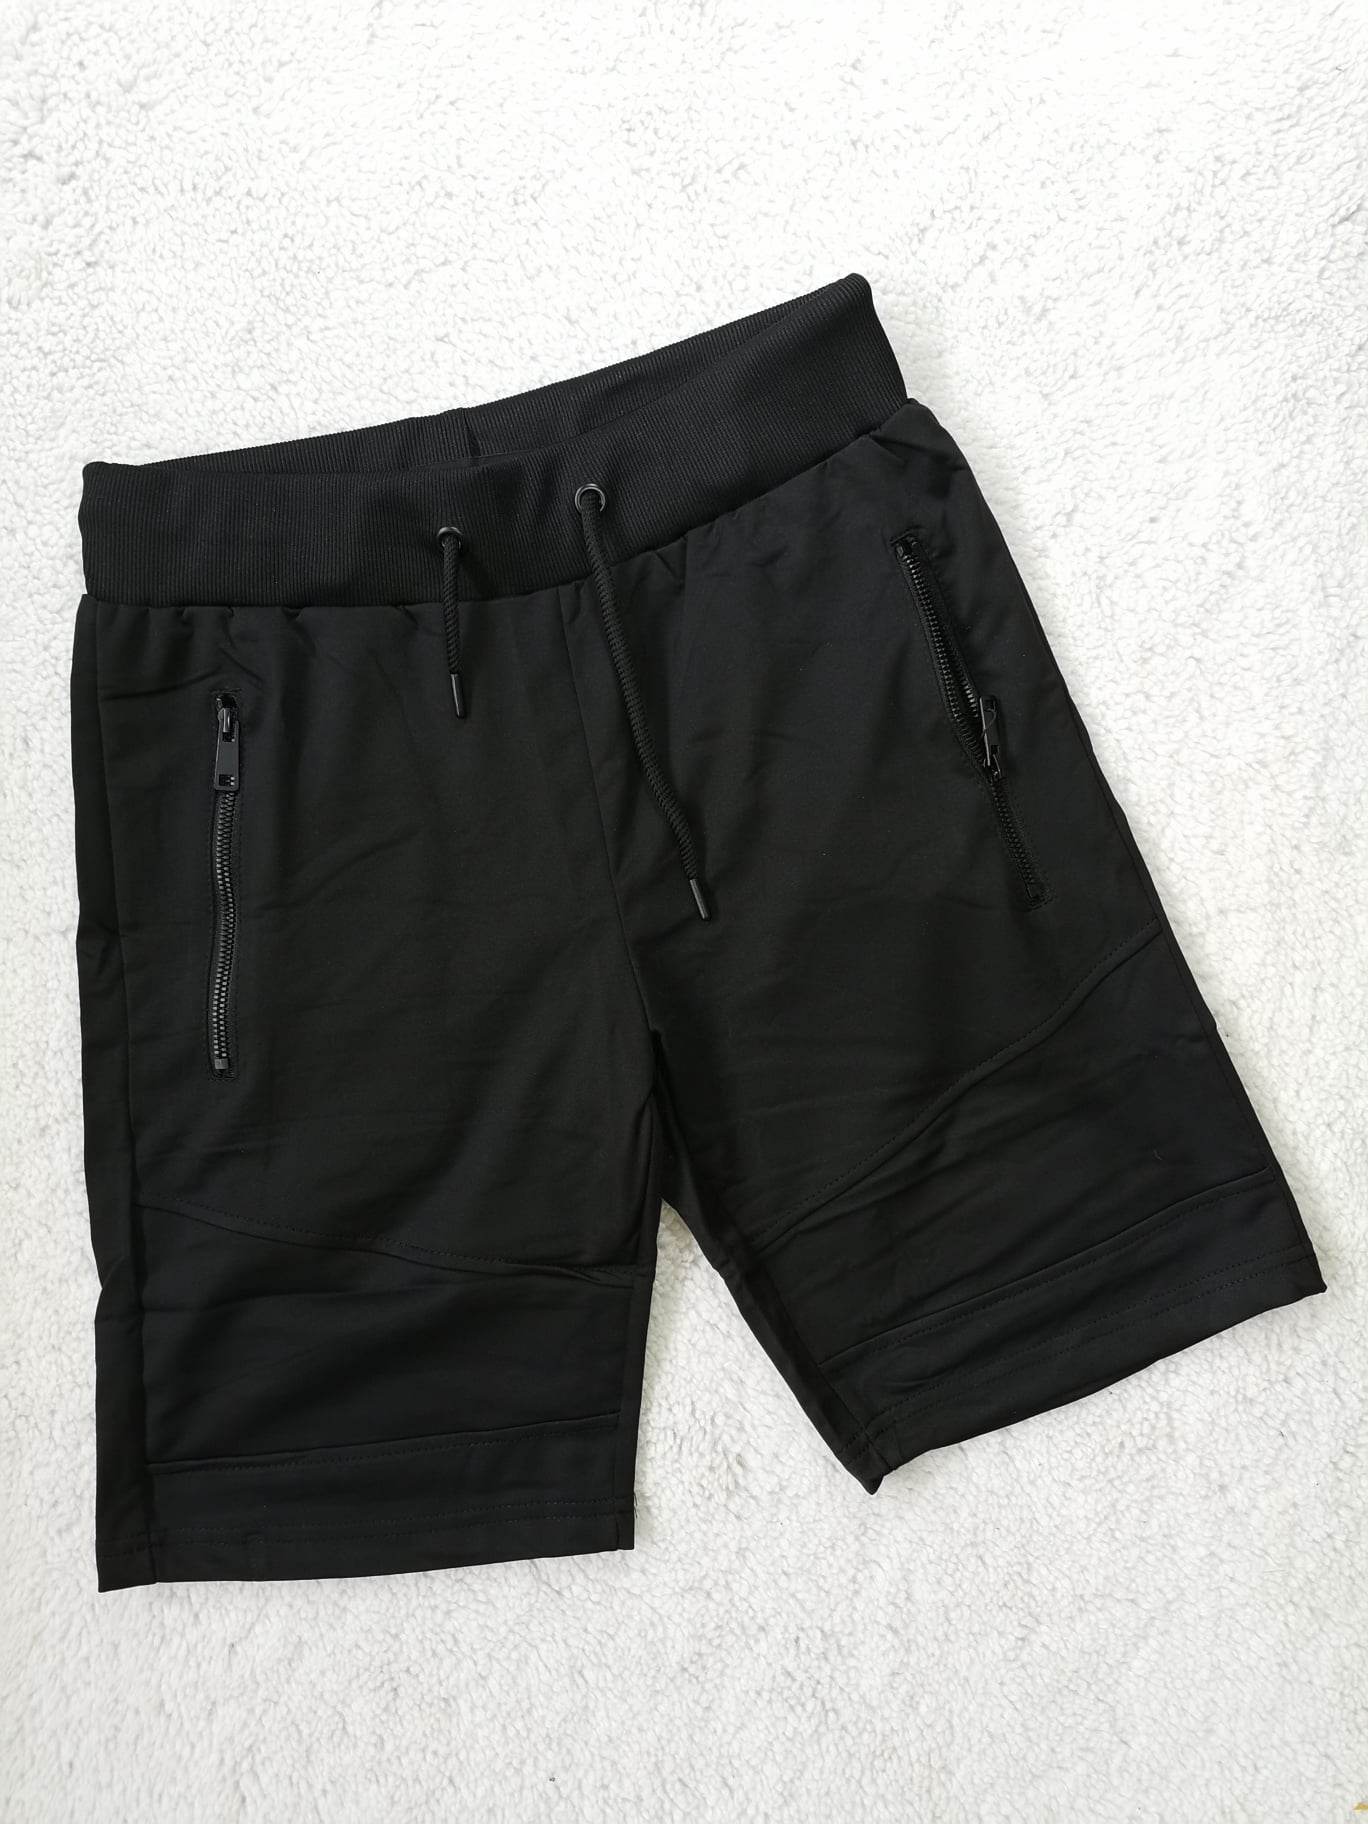 SHORTS FLEX STYLE 23/23 MONOC. WITH ZIP POCKETS ΜΑΝ